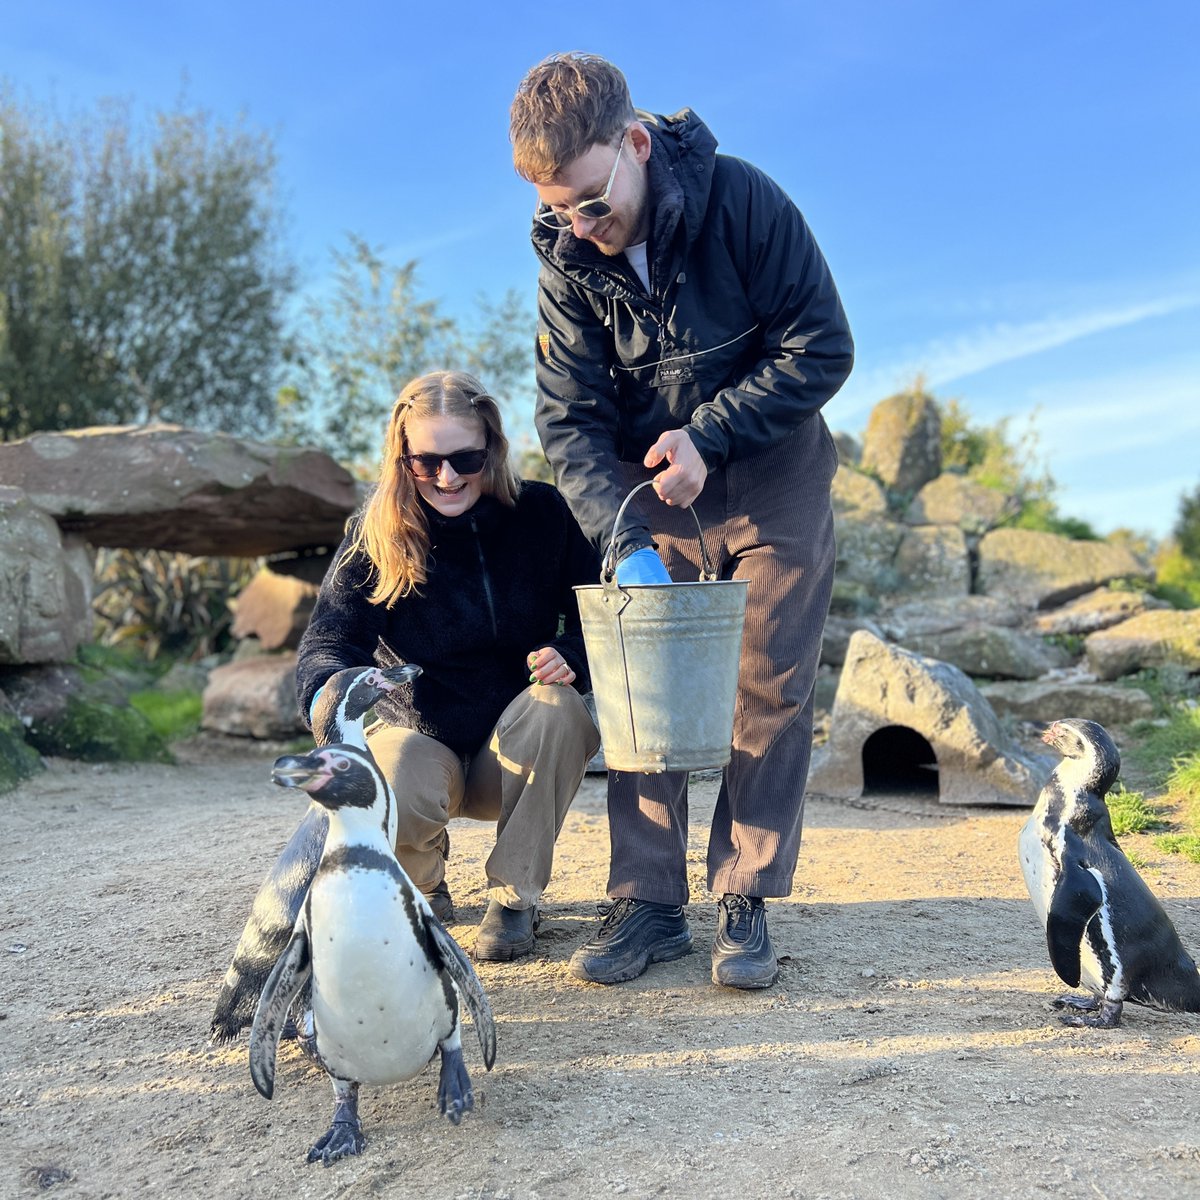 🎄Christmas Giveaway🎄 🏆 Penguin Experience for two! Winner gets behind the scenes to meet our penguins up close for an unforgettable adventure! HOW TO ENTER: ⭐️ Follow us ⭐️ Retweet this tweet ⭐️ Tag a Friend 📅 Ends: 25th of Dec #chrismtasgiveaway #gift #animallover